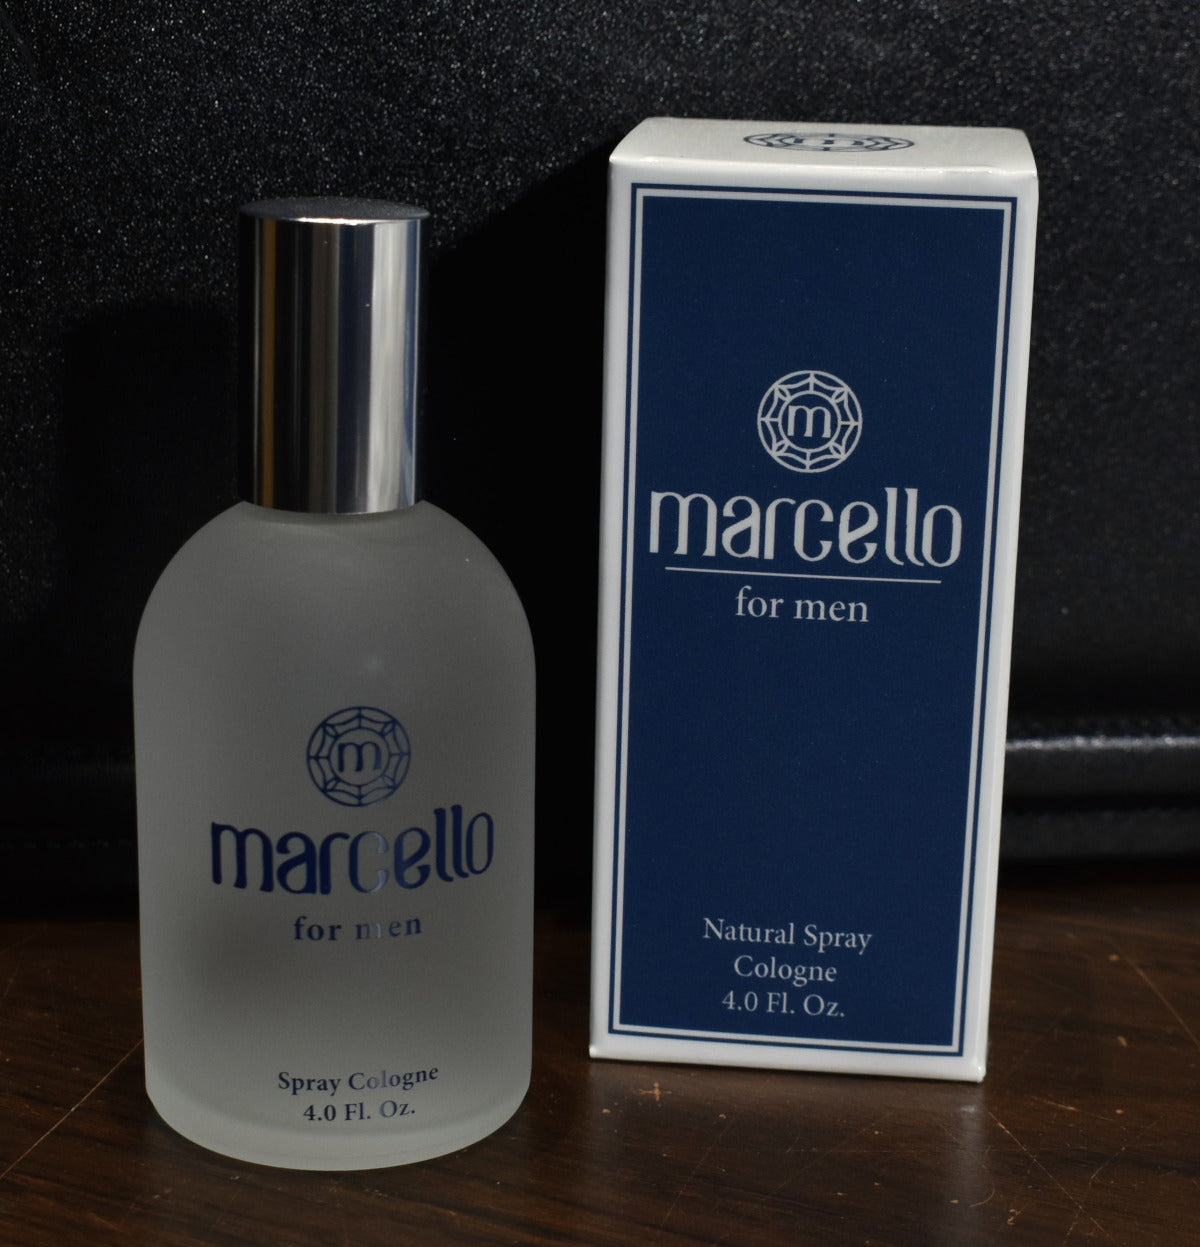 Mixed in Italy, a custom blend of exotic woods for a classic cedar scent, then mixed with citrus and spices to create a medium and robust, masculine fragrance that lasts throughout the day. Made in USA from Italian oils.